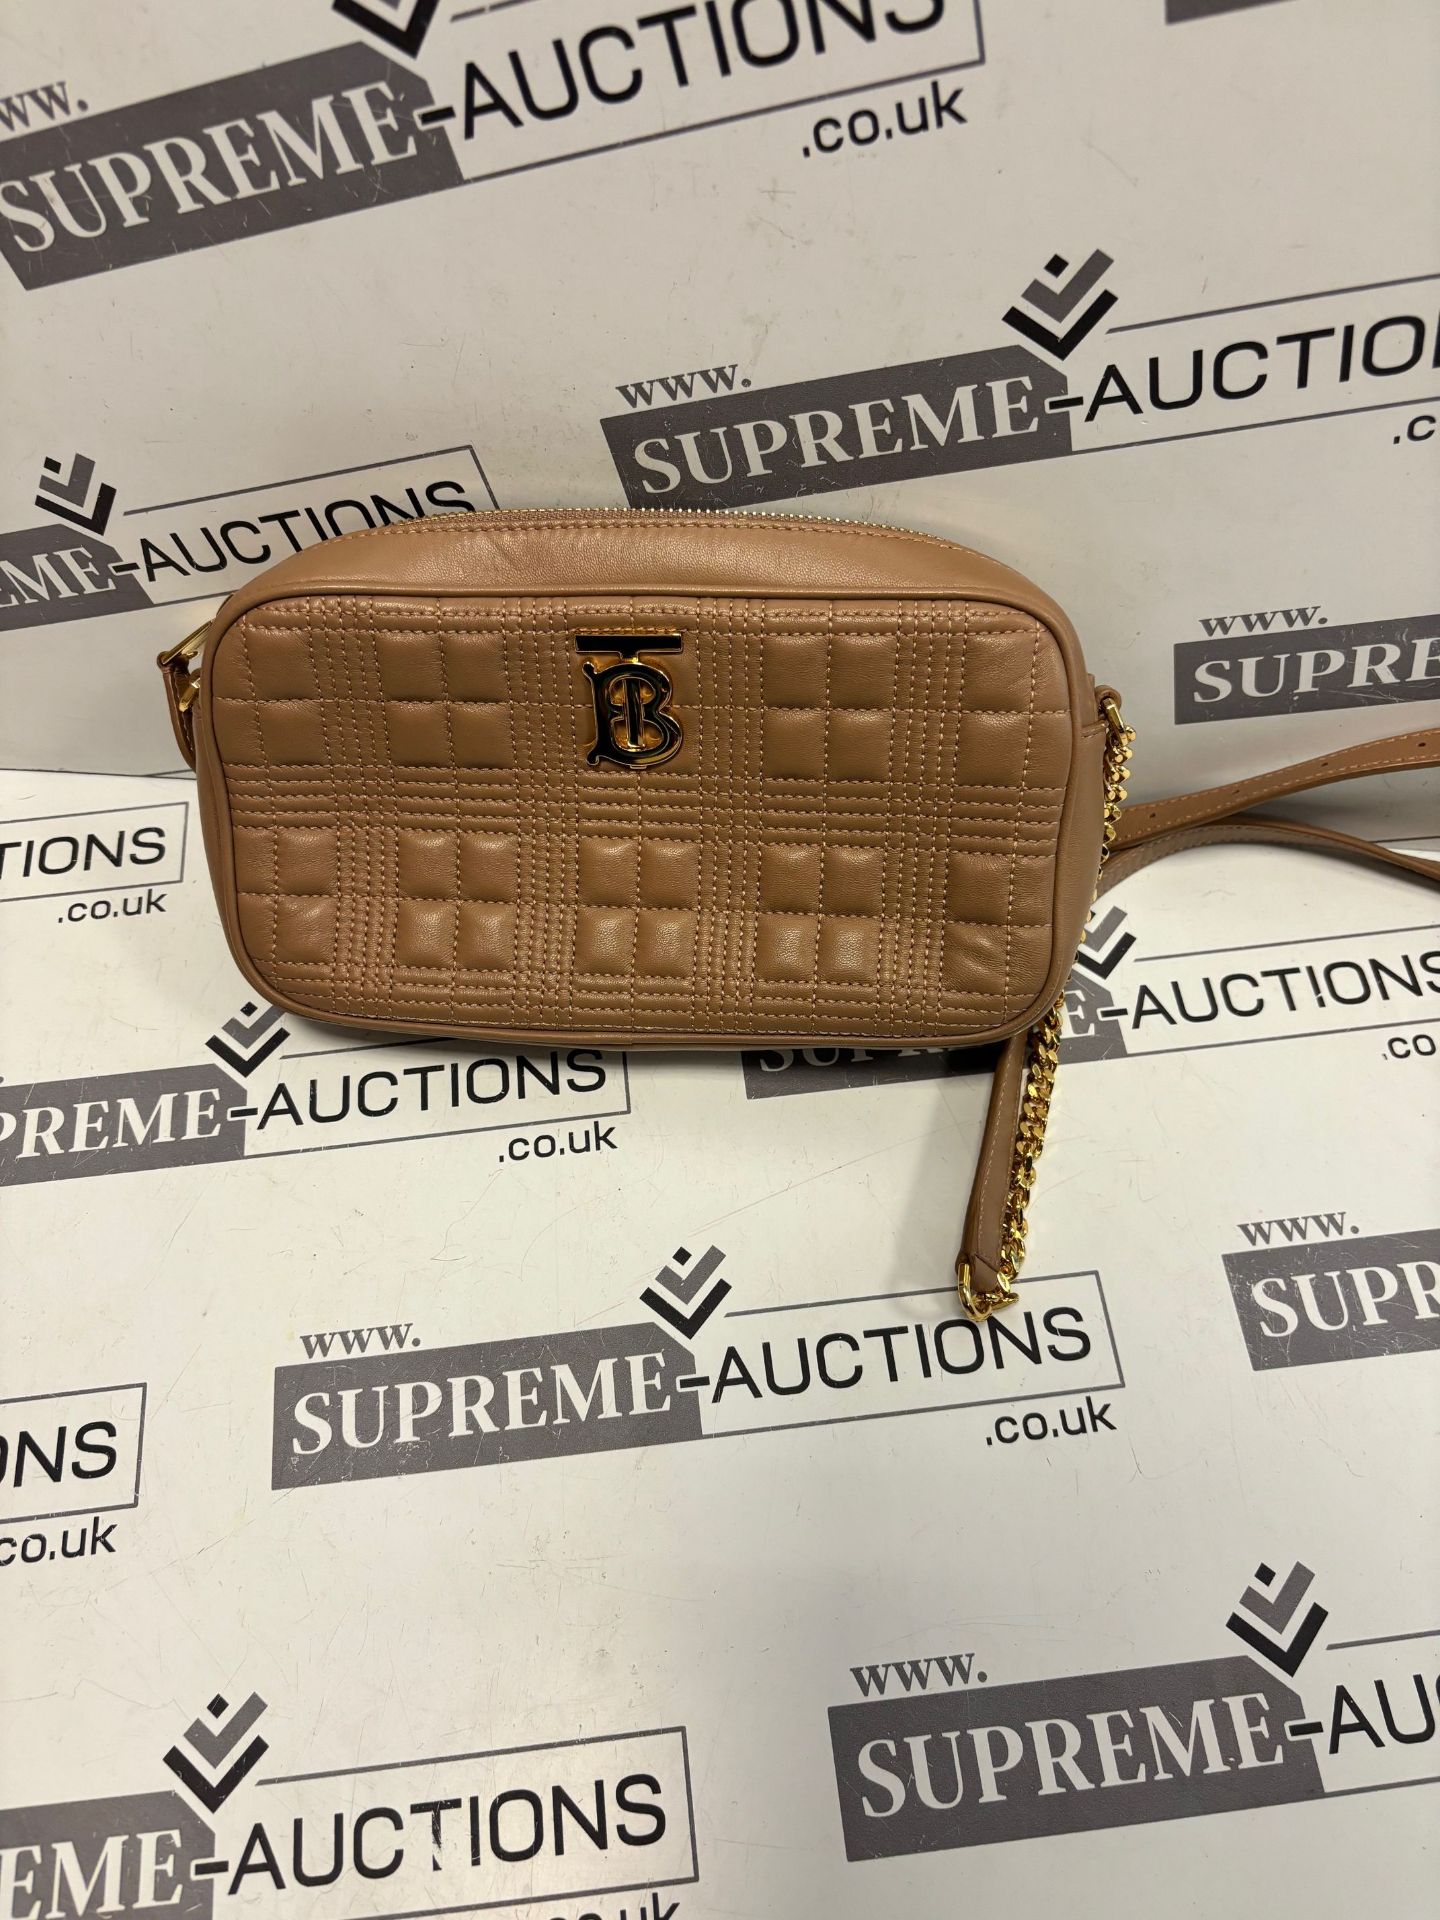 (No Vat) Burberry tb soft crossbody bag camel with Gold. Approx 23x12cm. - Image 4 of 7